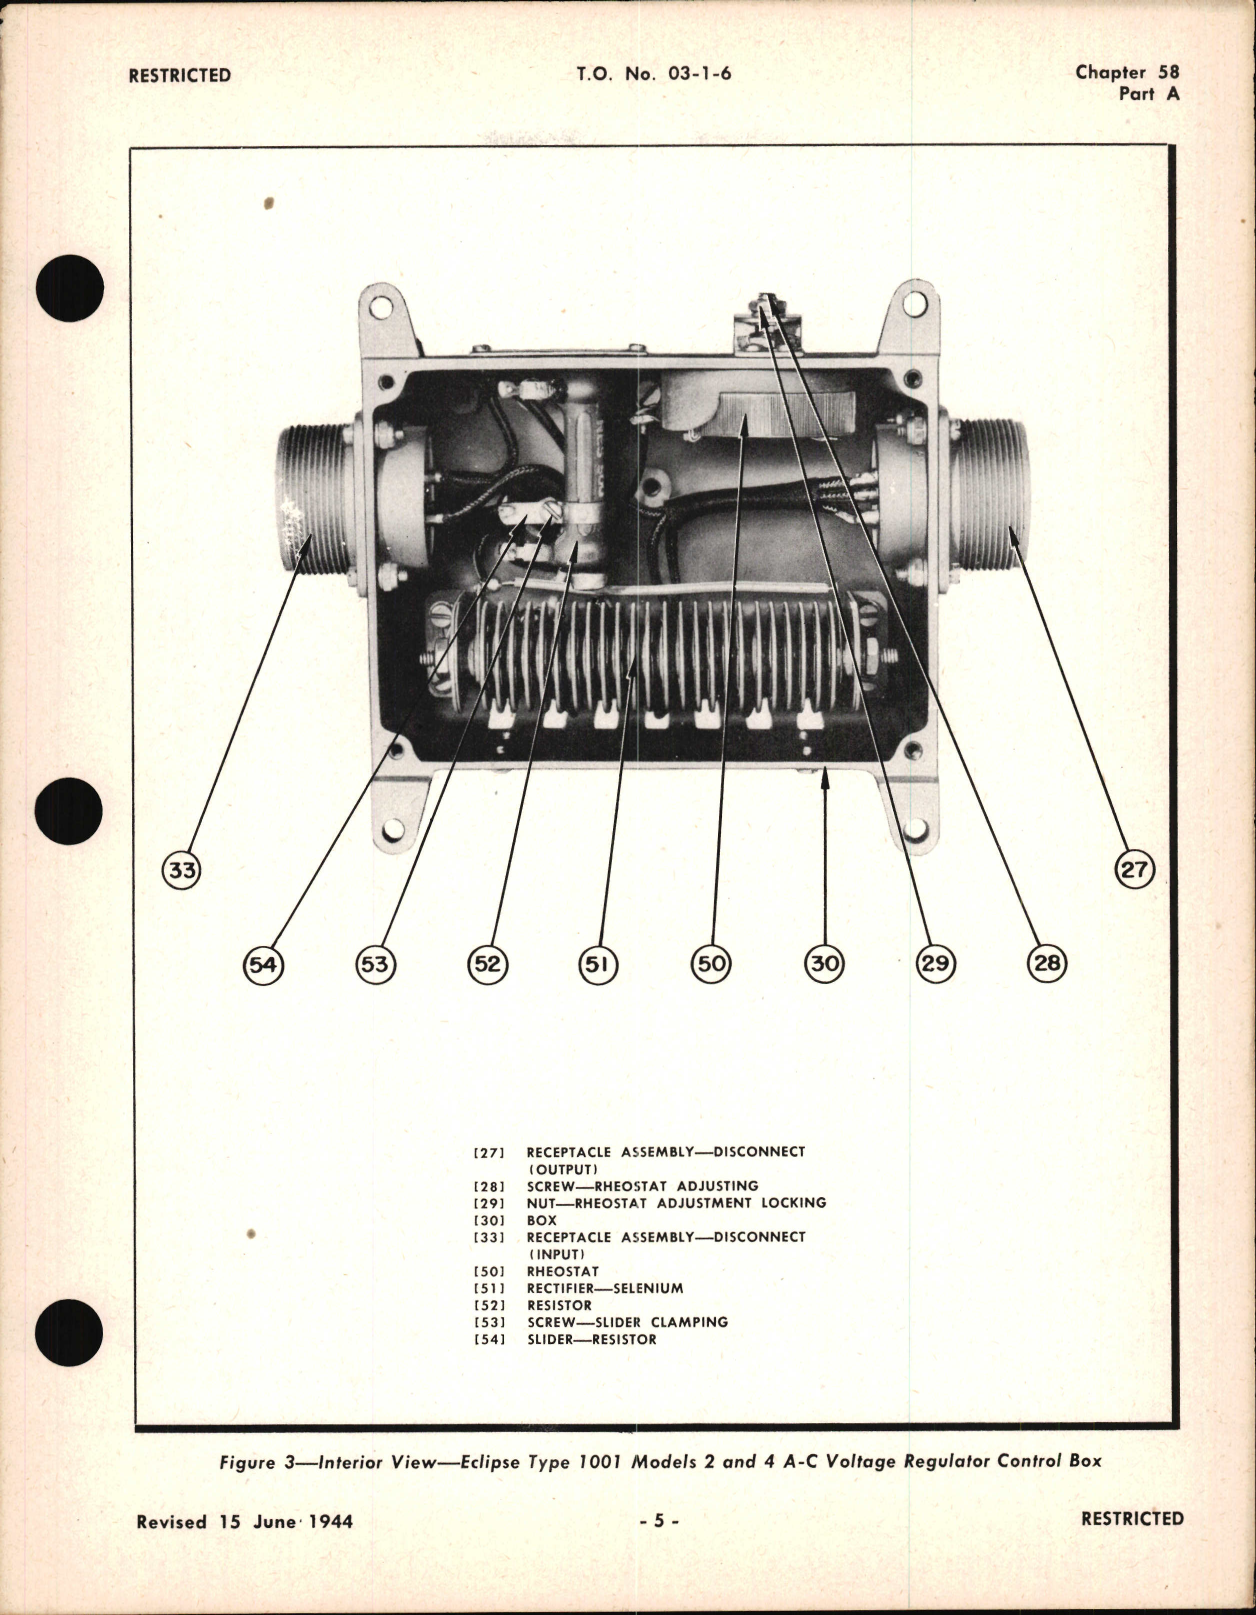 Sample page 5 from AirCorps Library document: Operating and Service Instructions for A-C Carbon Pile Voltage Regulator Control Box, Ch 58 Part A